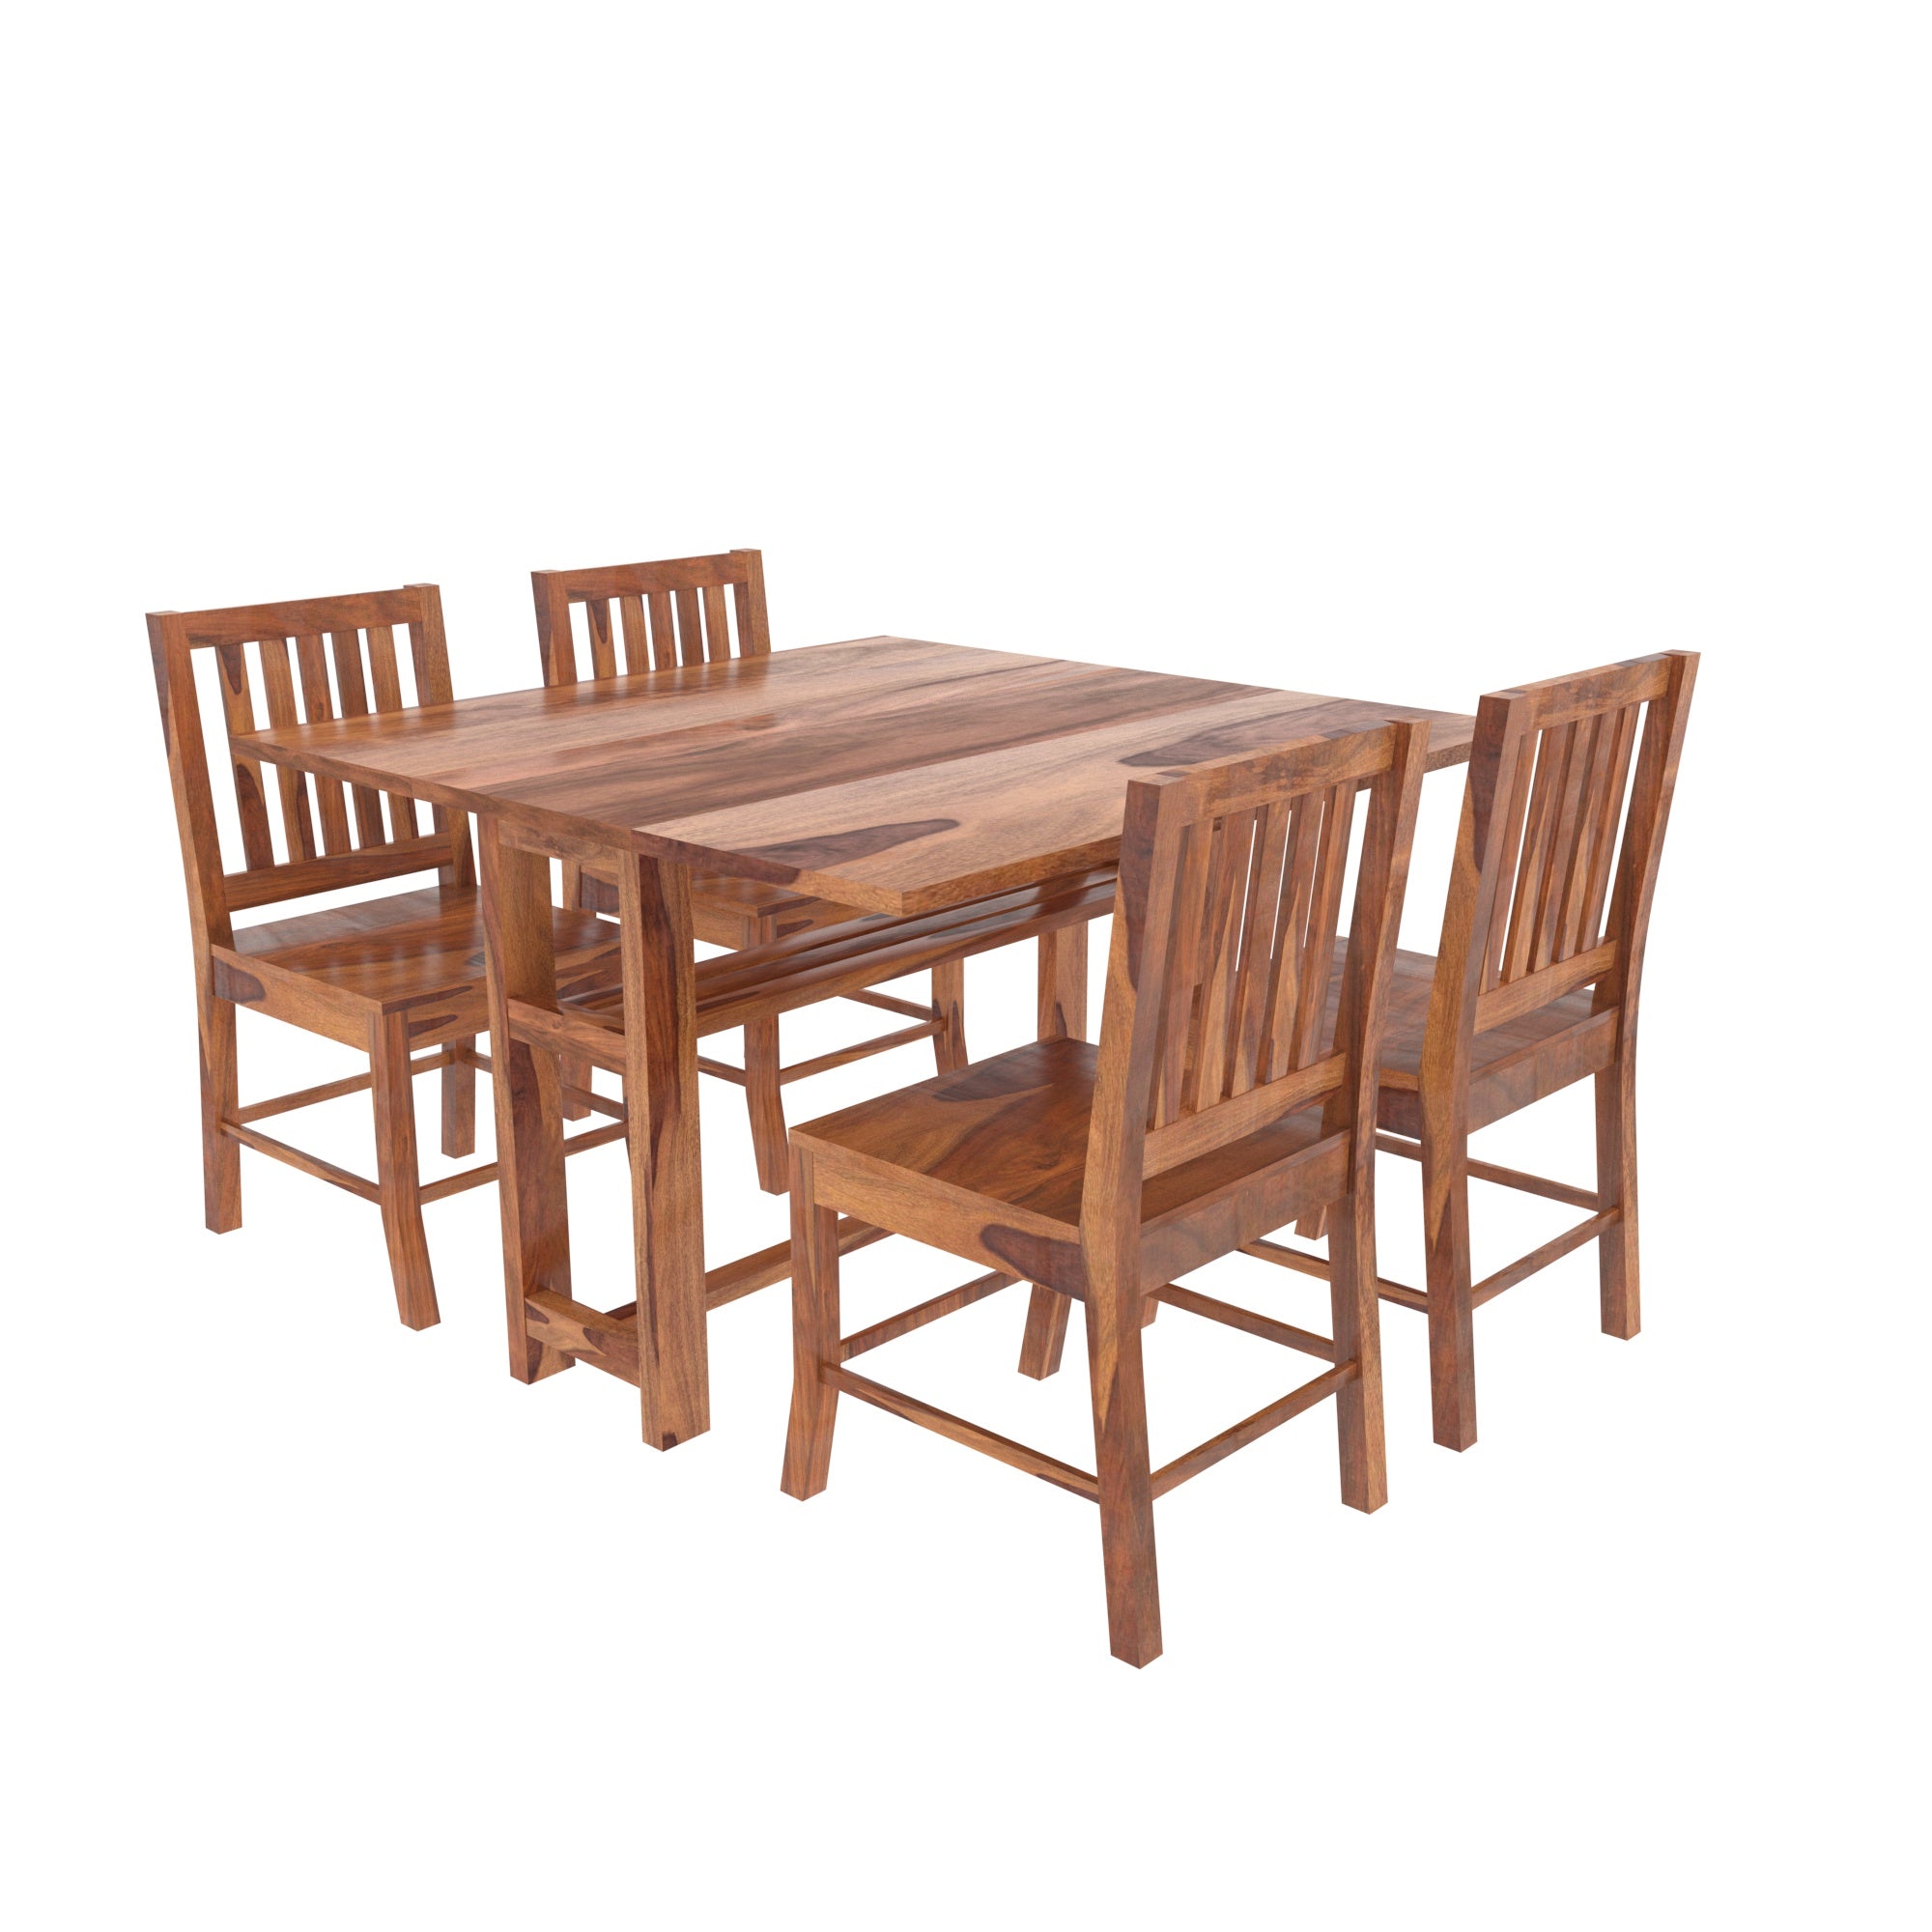 Southern Classic Light Finished Handmade Wooden Dining Set Dining Set